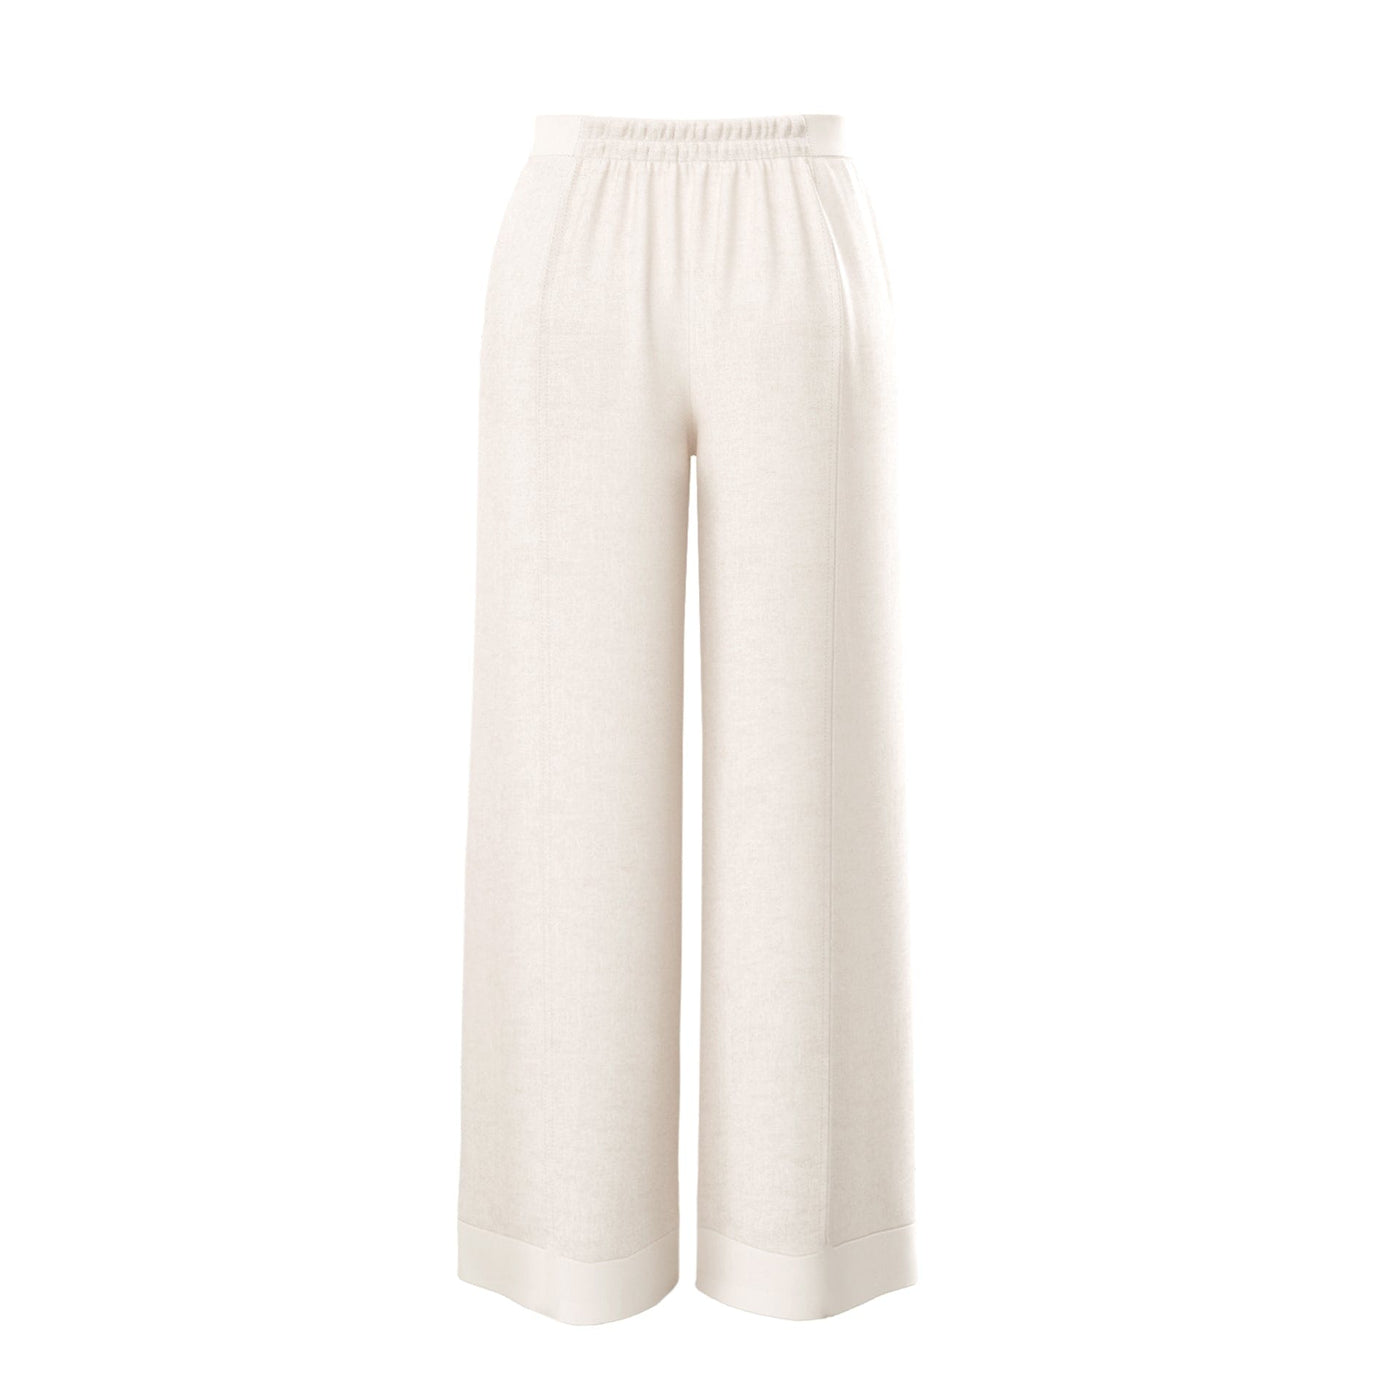 Lilly Pilly Collection Oli pants made from 100% Organic linen in Ivory, as 3D model showing front view